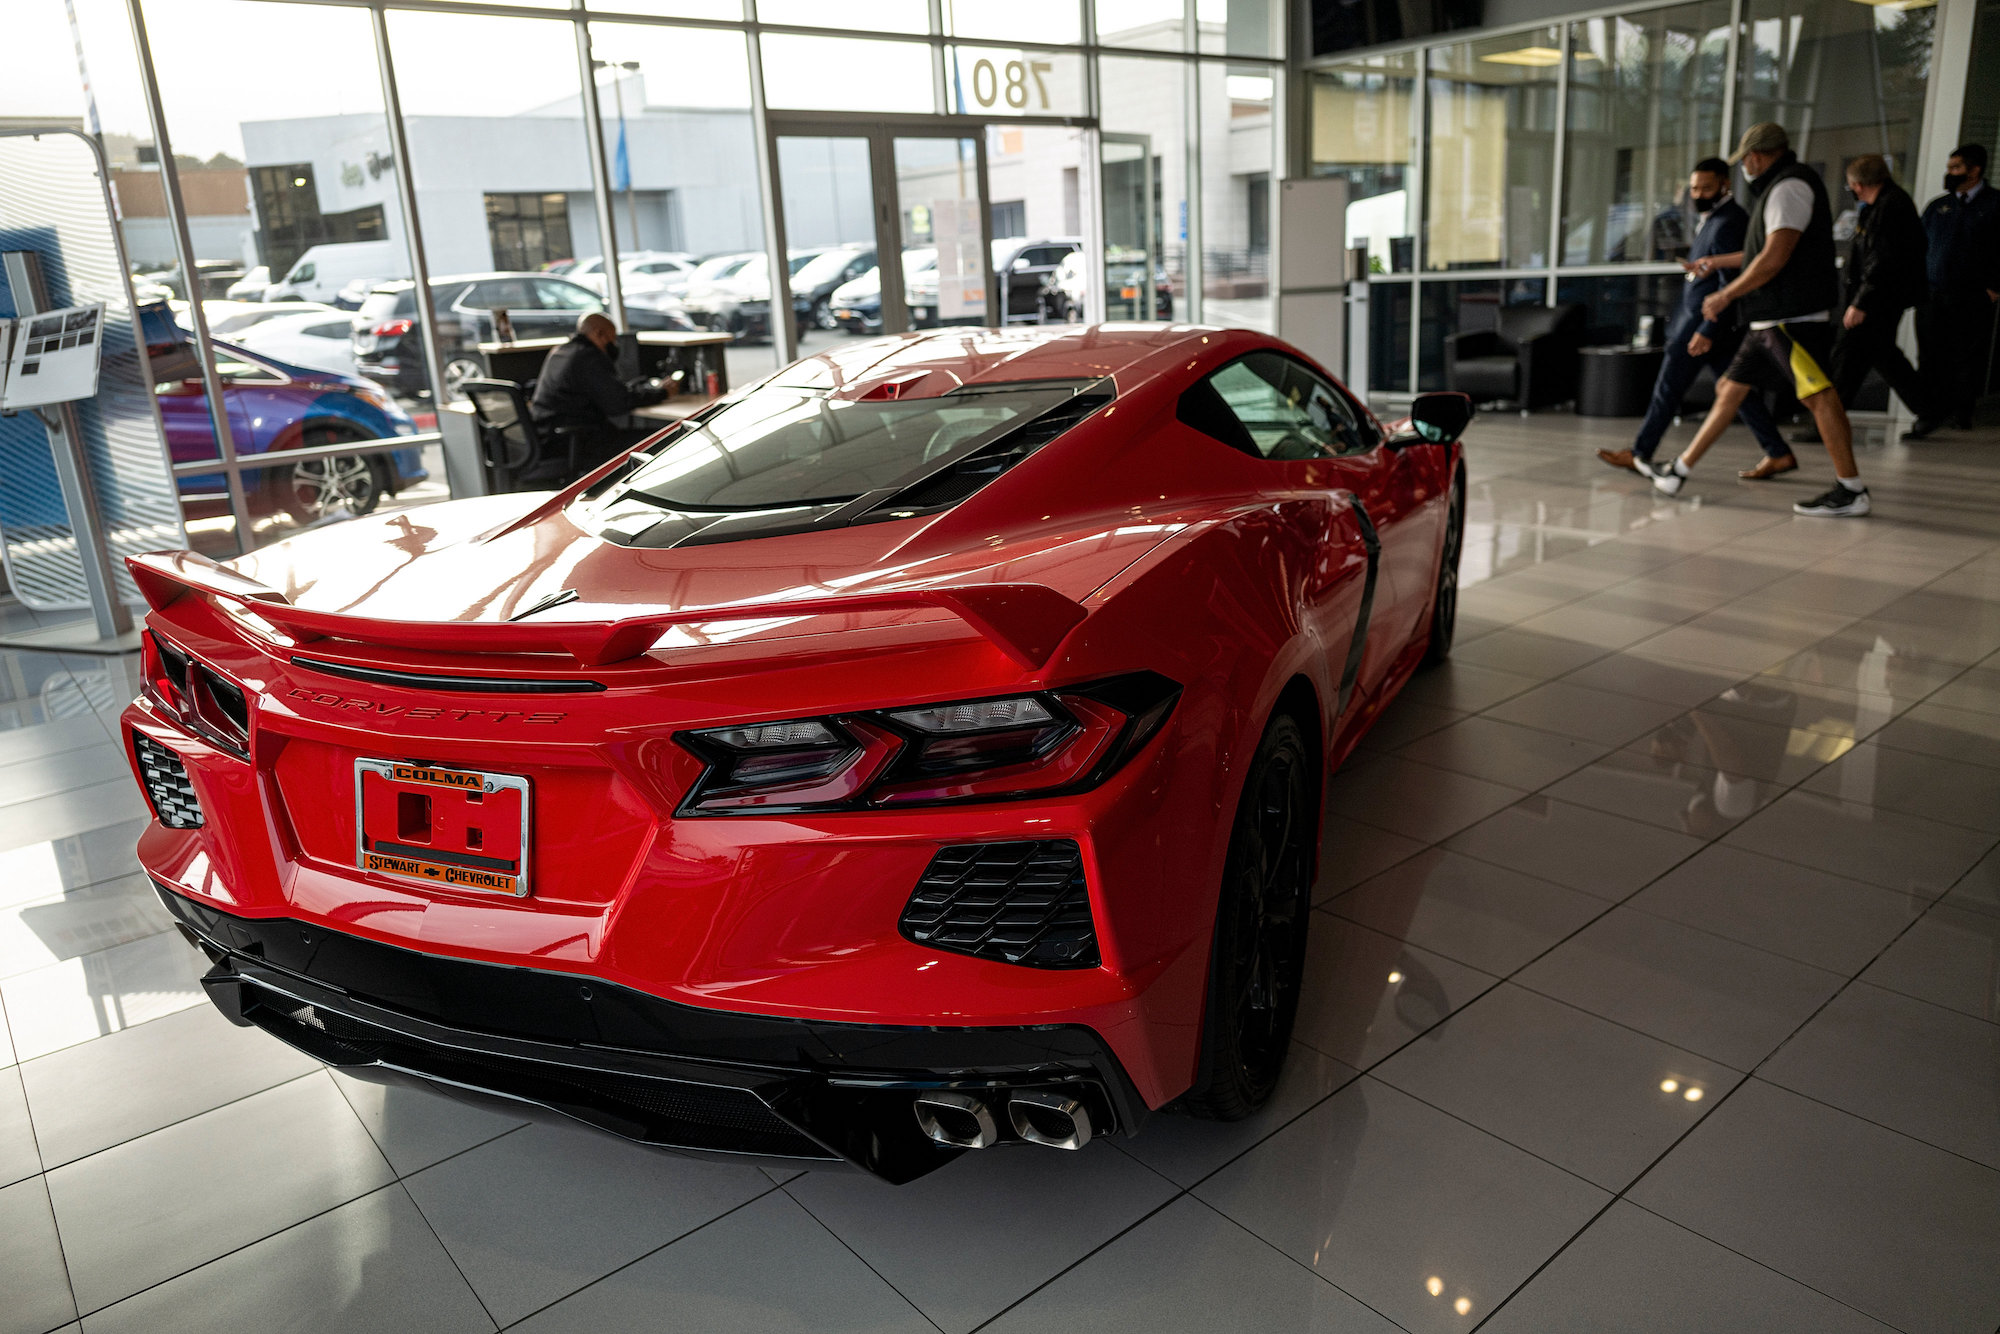 A red 2021 Chevy Corvette sports car parked inside a car dealership in Colma, California, on Monday, February 8, 2021